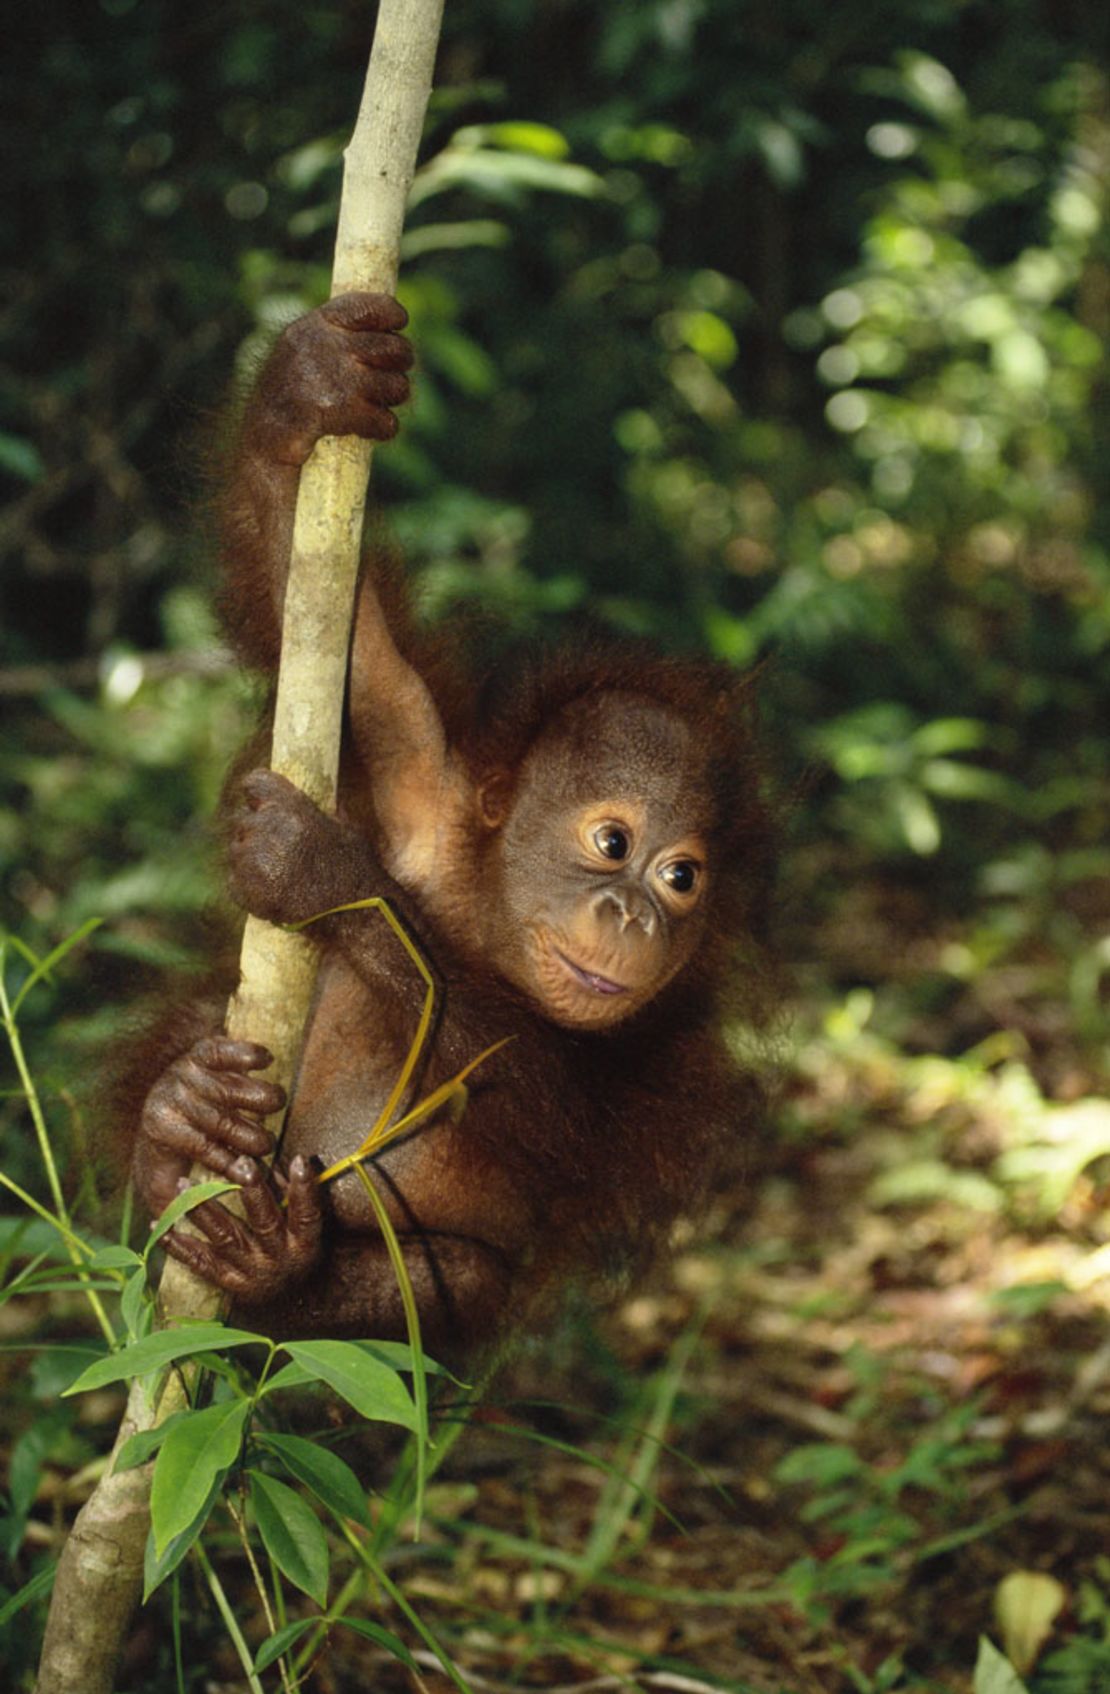 The Borneo leg of the trip offers the chance to see little guys like this.